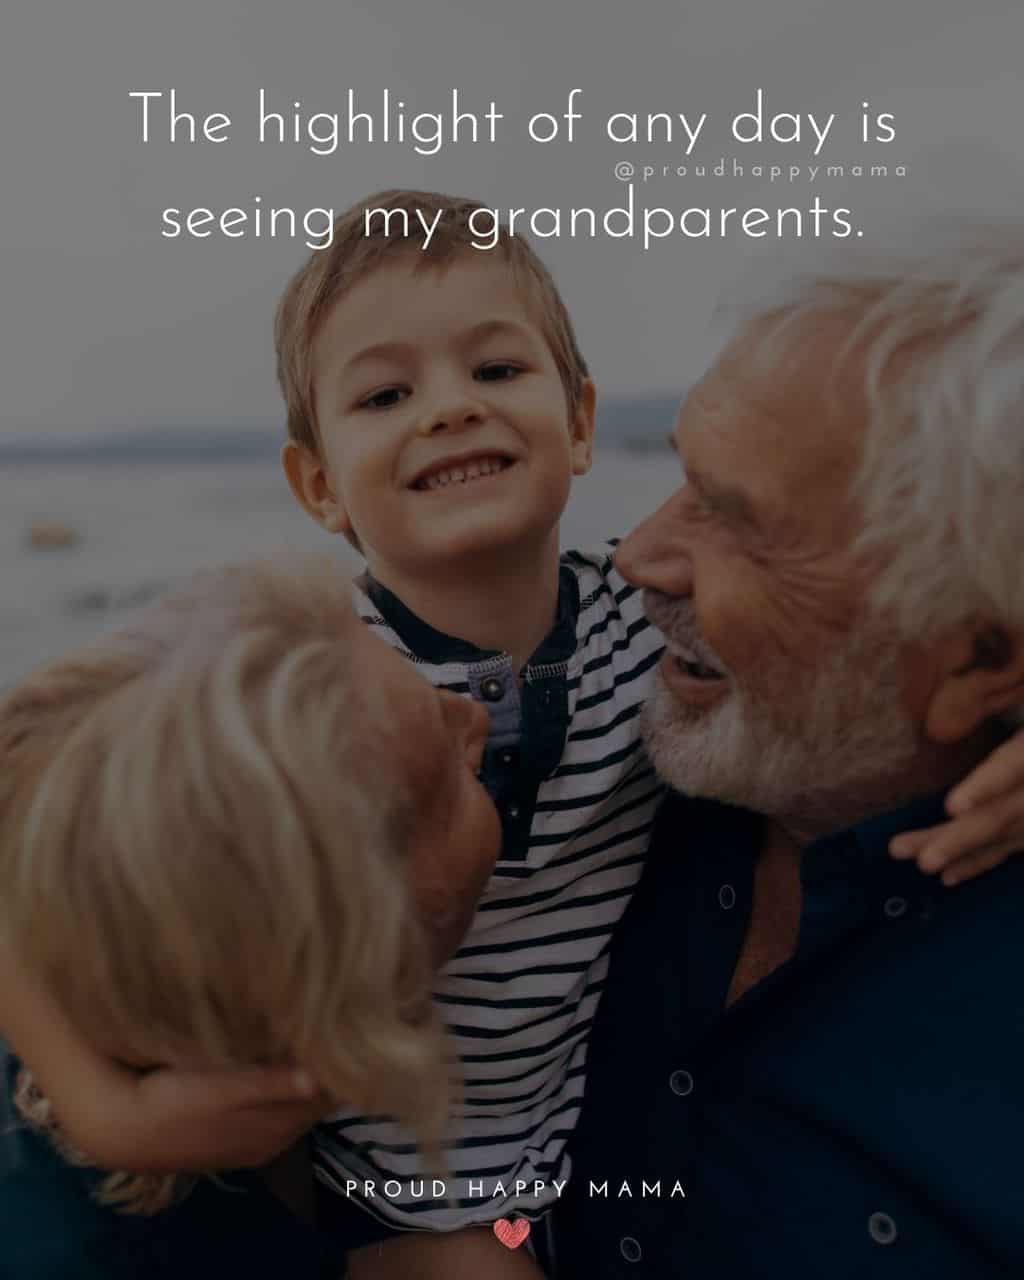 Grandparent Quotes – The highlight of any day is seeing my grandparents.’